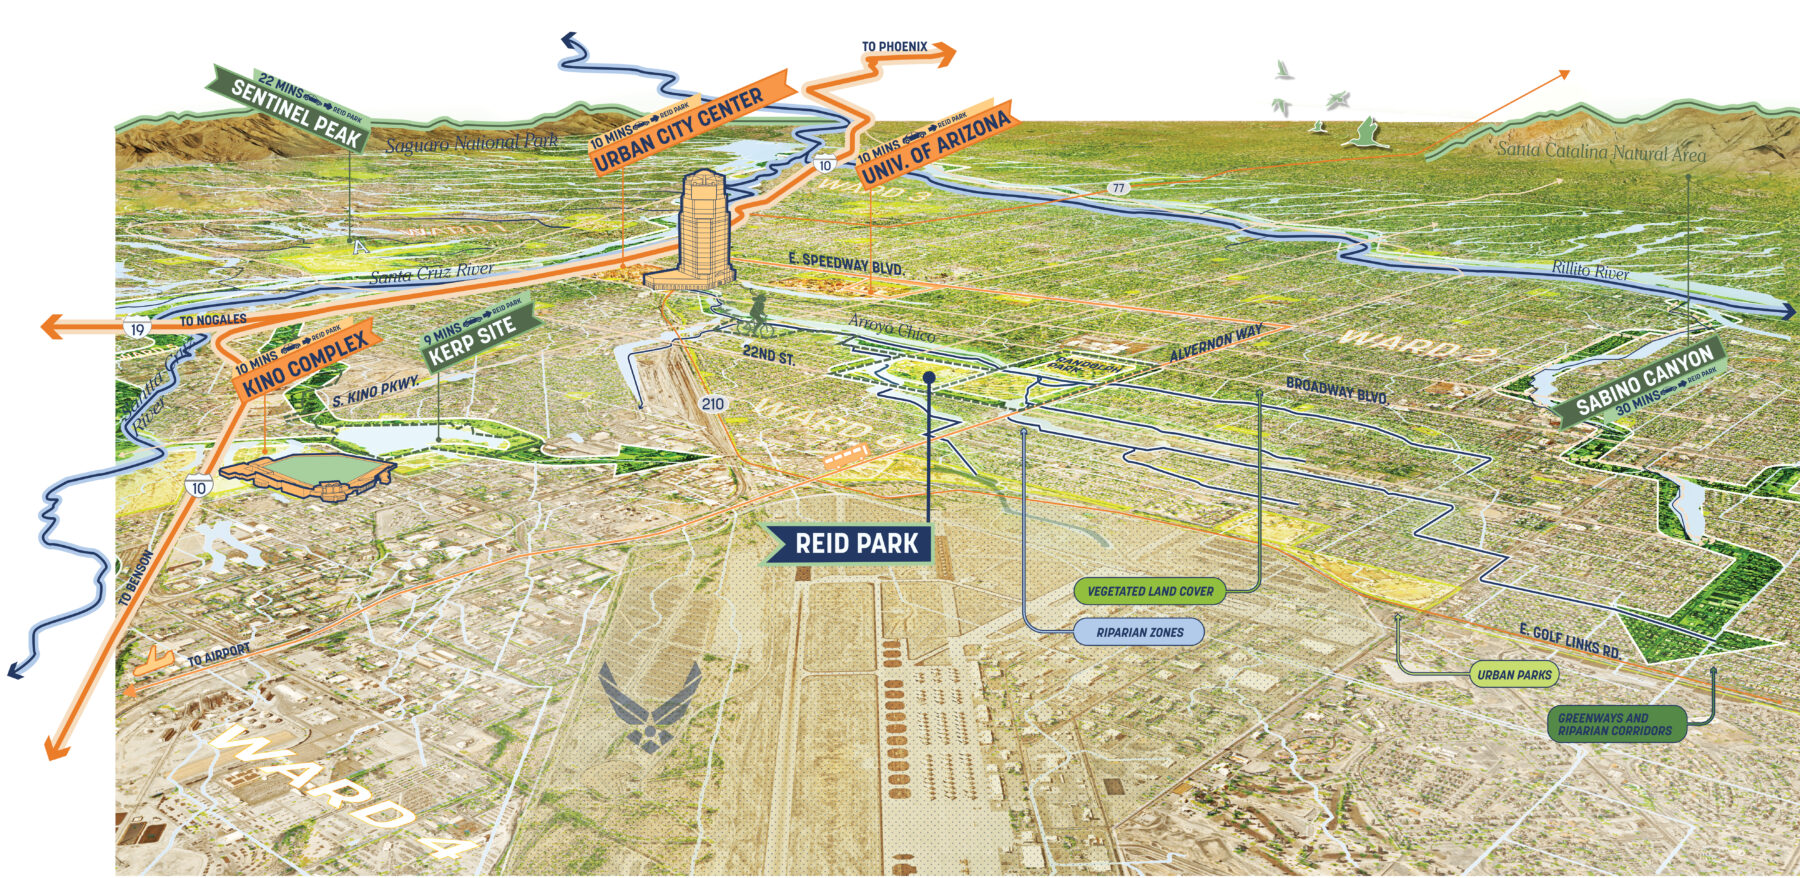 Birds eye view of Reid Park in relationship to downtown Tucson, showing context of green spaces and urbanized zones